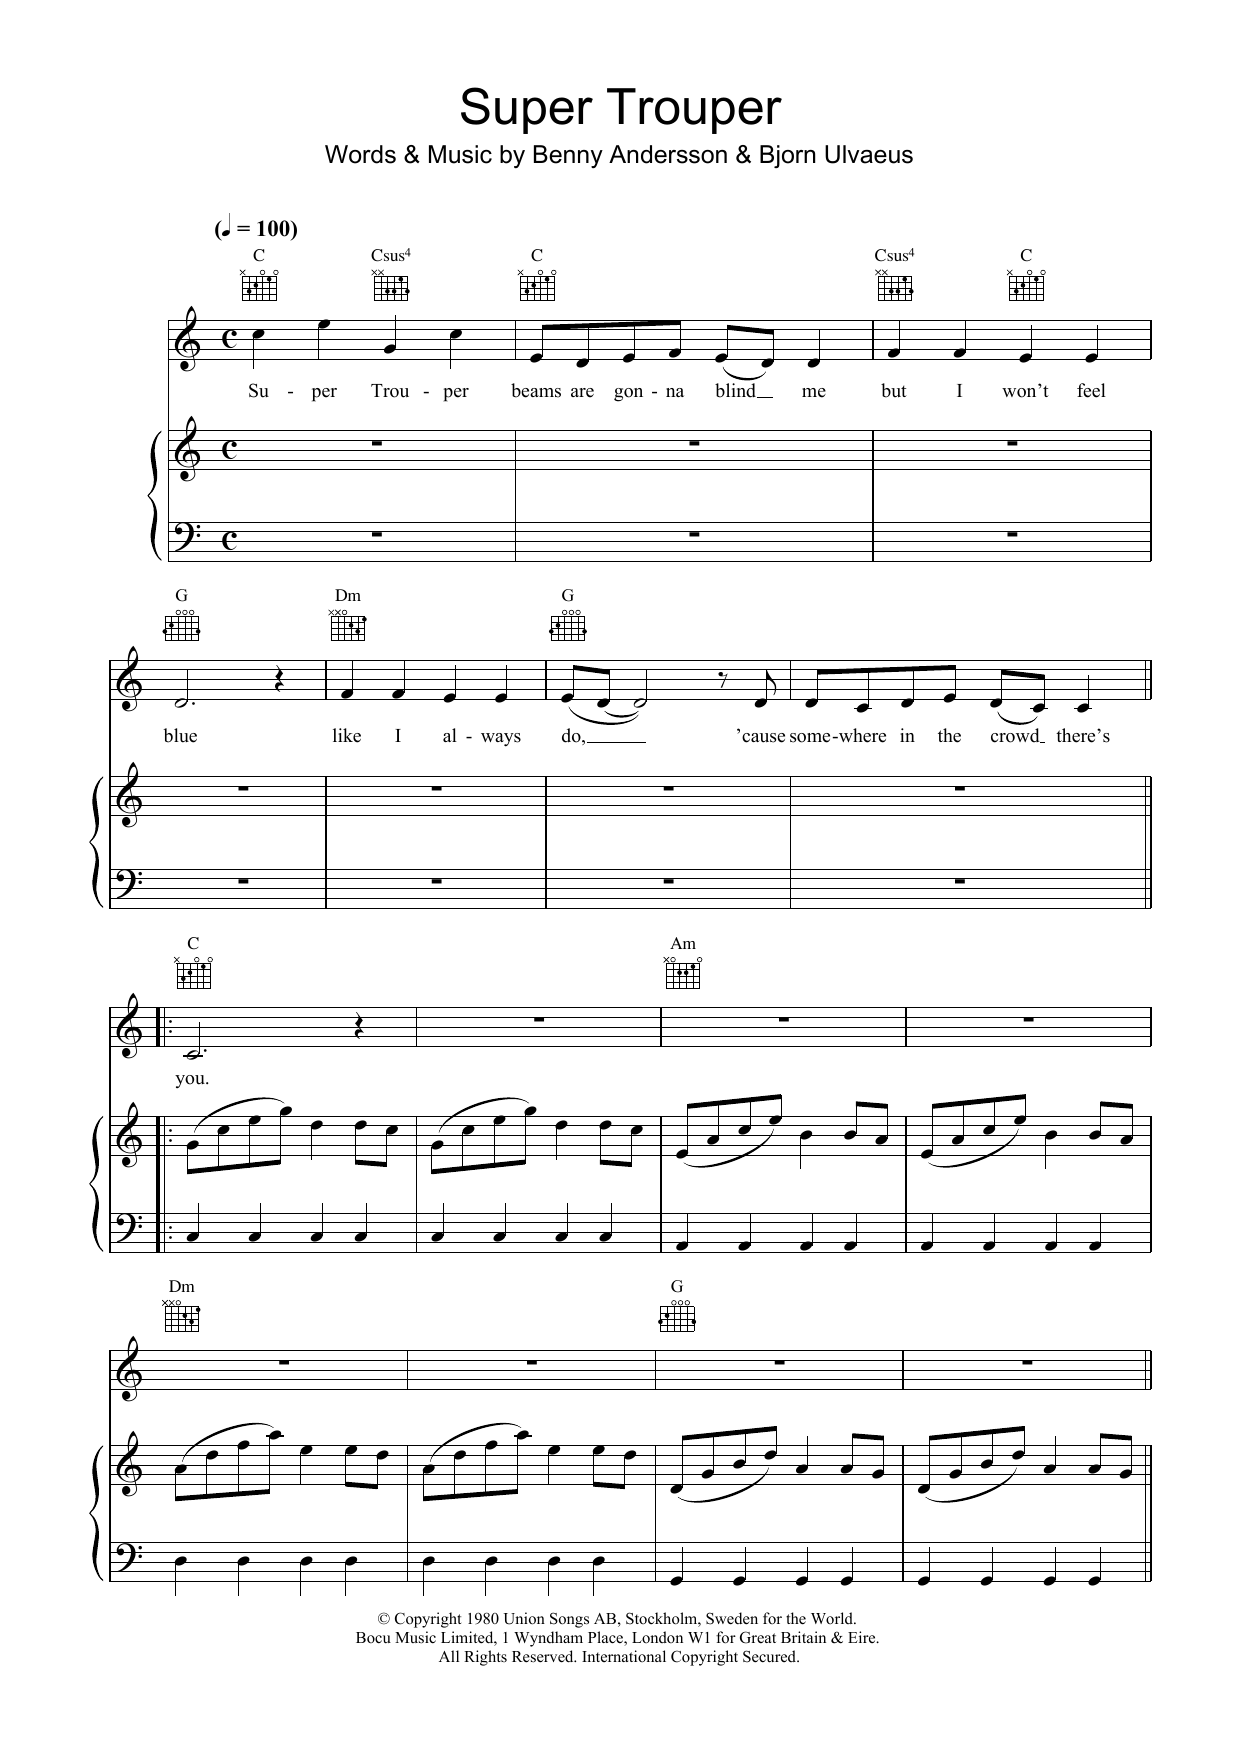 ABBA Super Trouper sheet music notes and chords. Download Printable PDF.